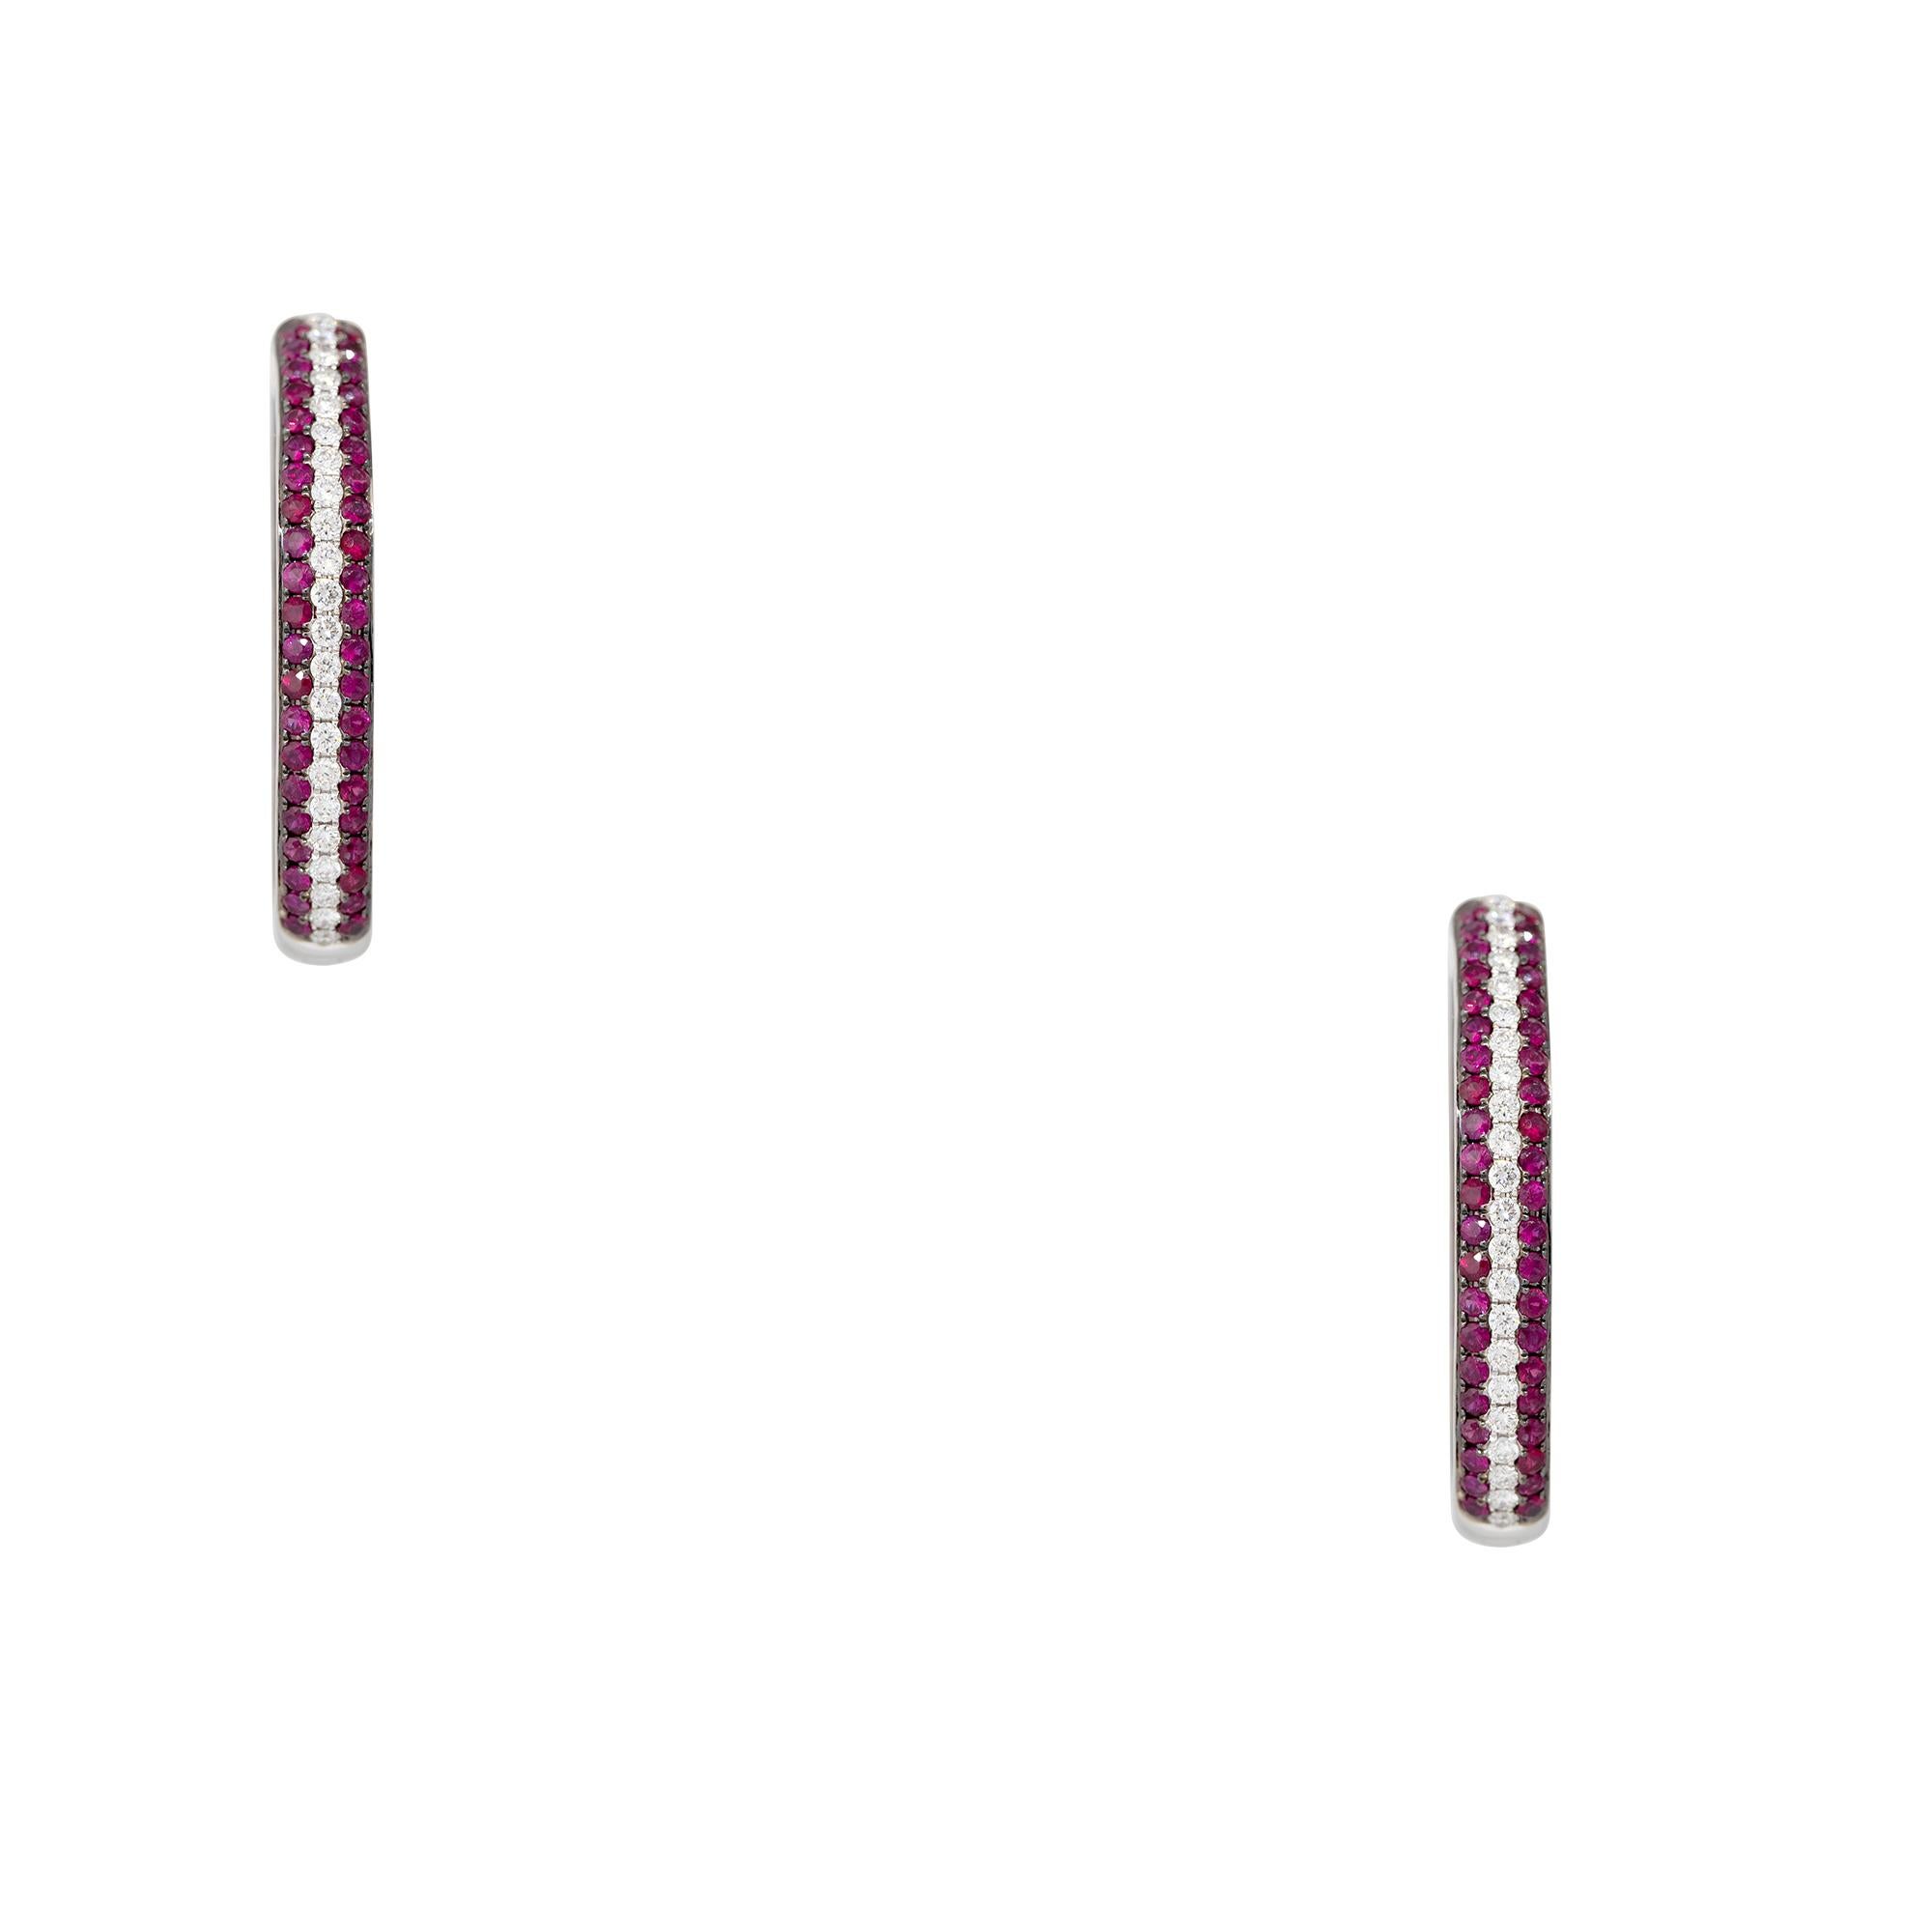 18k White Gold 3.45ctw Ruby & 1.42ctw Diamond Inside Out 3-Row Hoop Earrings
Material: 18k White Gold
Gemstone/Diamond Details: There are approximately 3.45 carats of round brilliant cut Rubies and approximately 1.42 carats of round brilliant cut